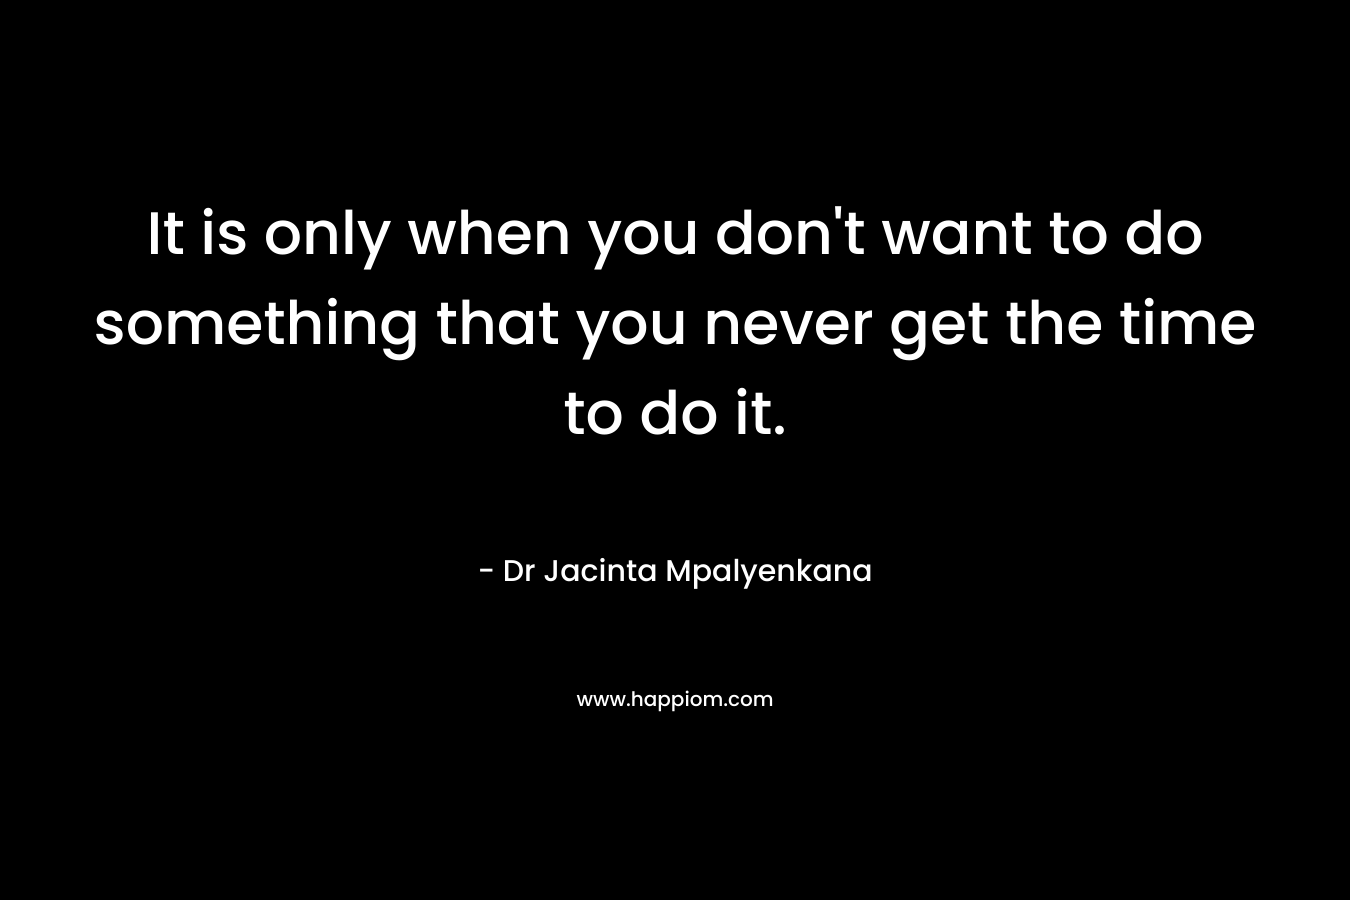 It is only when you don't want to do something that you never get the time to do it.